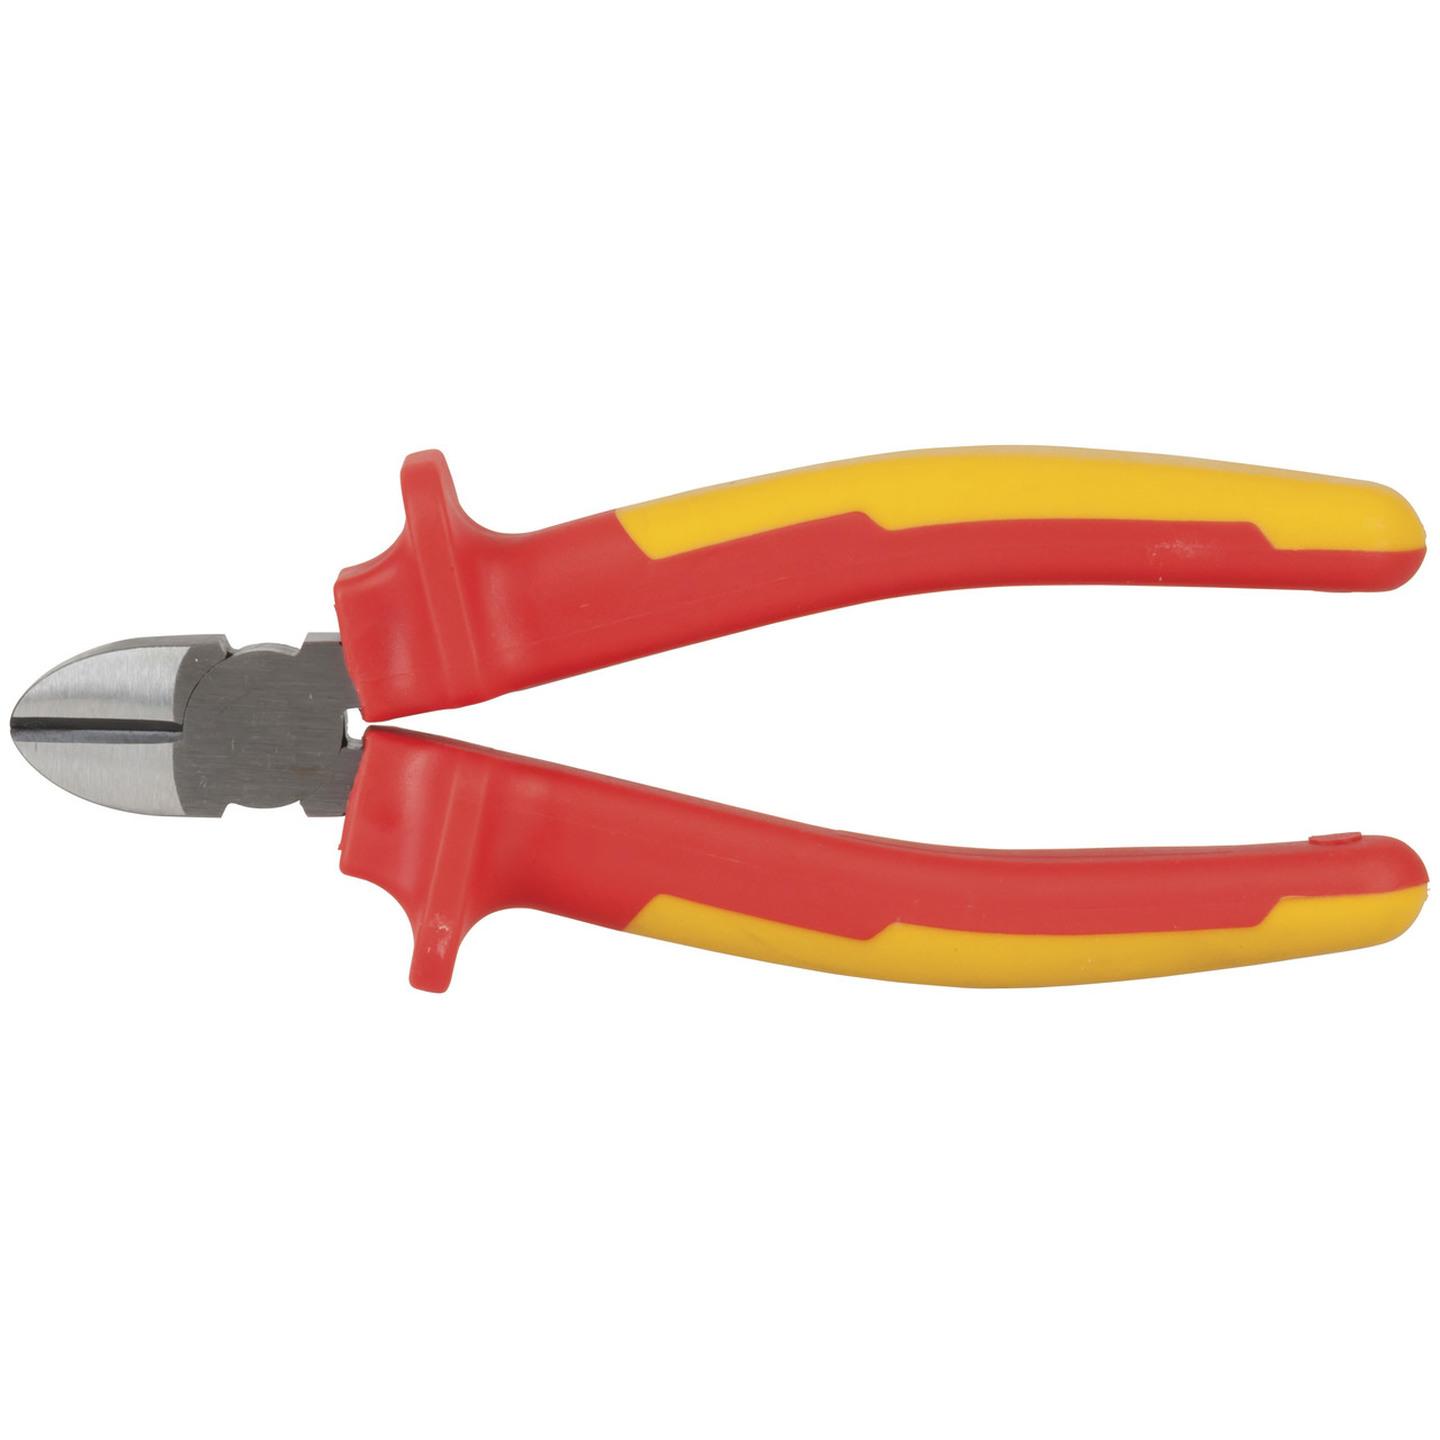 6inch Insulated Side Cutters